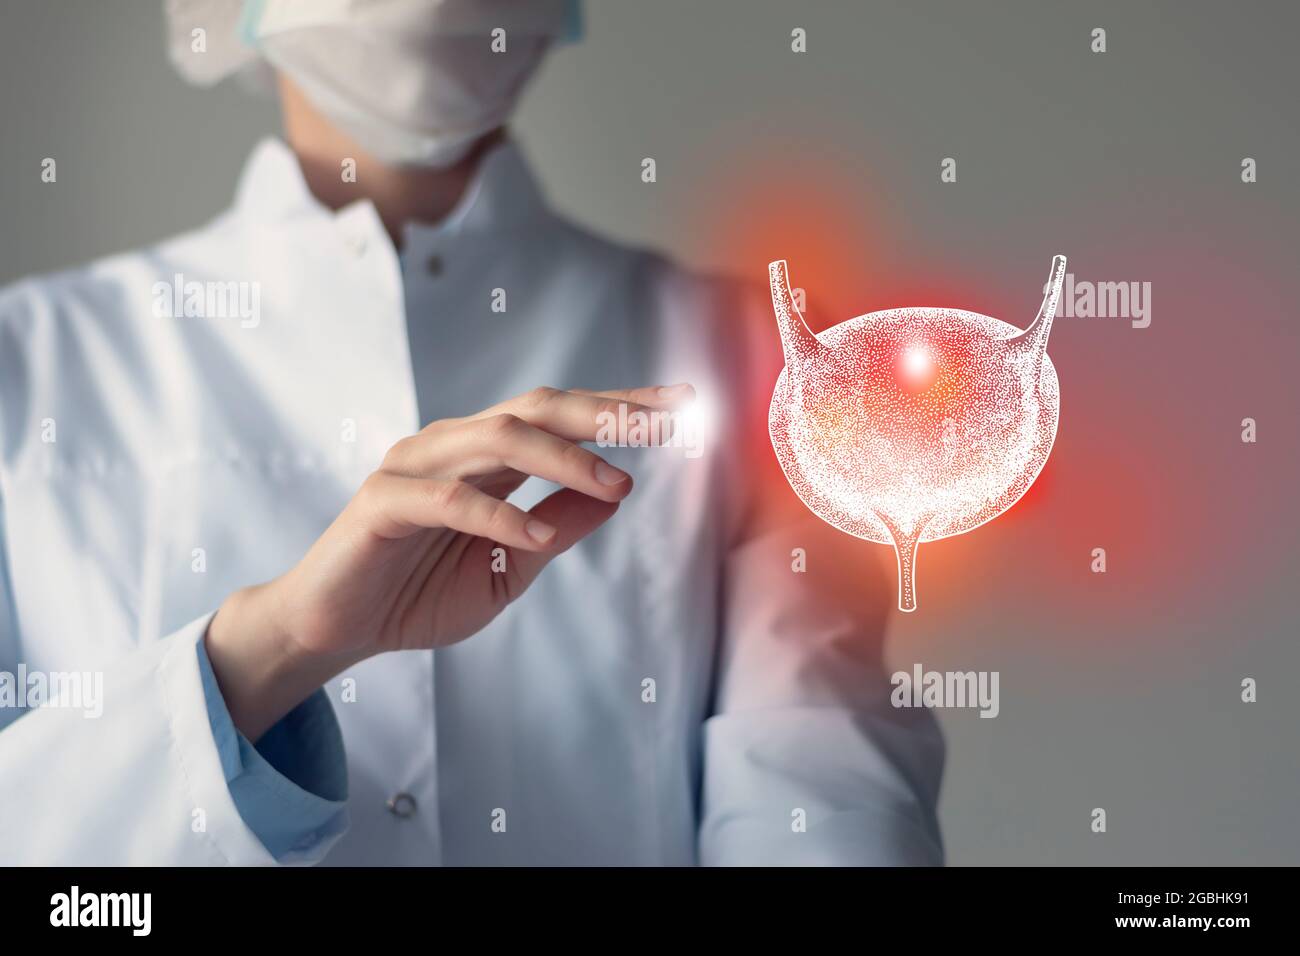 Female doctor touches virtual Bladder in hand. Blurred photo, handrawn human organ, highlighted red as symbol of disease. Healthcare hospital service Stock Photo